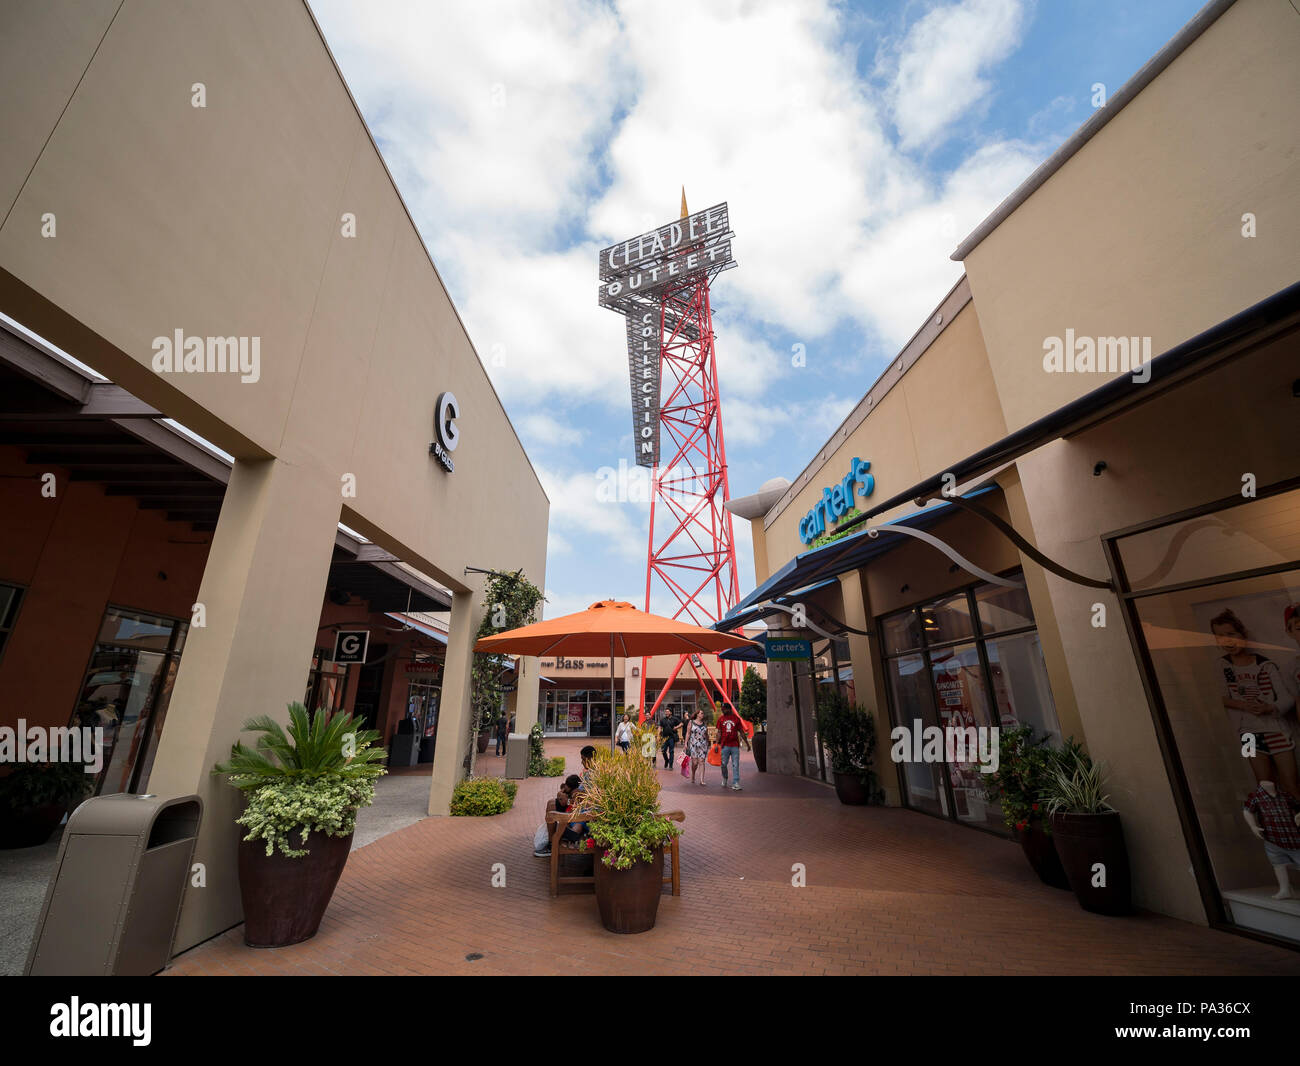 Los Angeles, JUN 24: The famous downtown Citadel Outlets on JUN 24, 2018 at Los Angeles, California Stock Photo